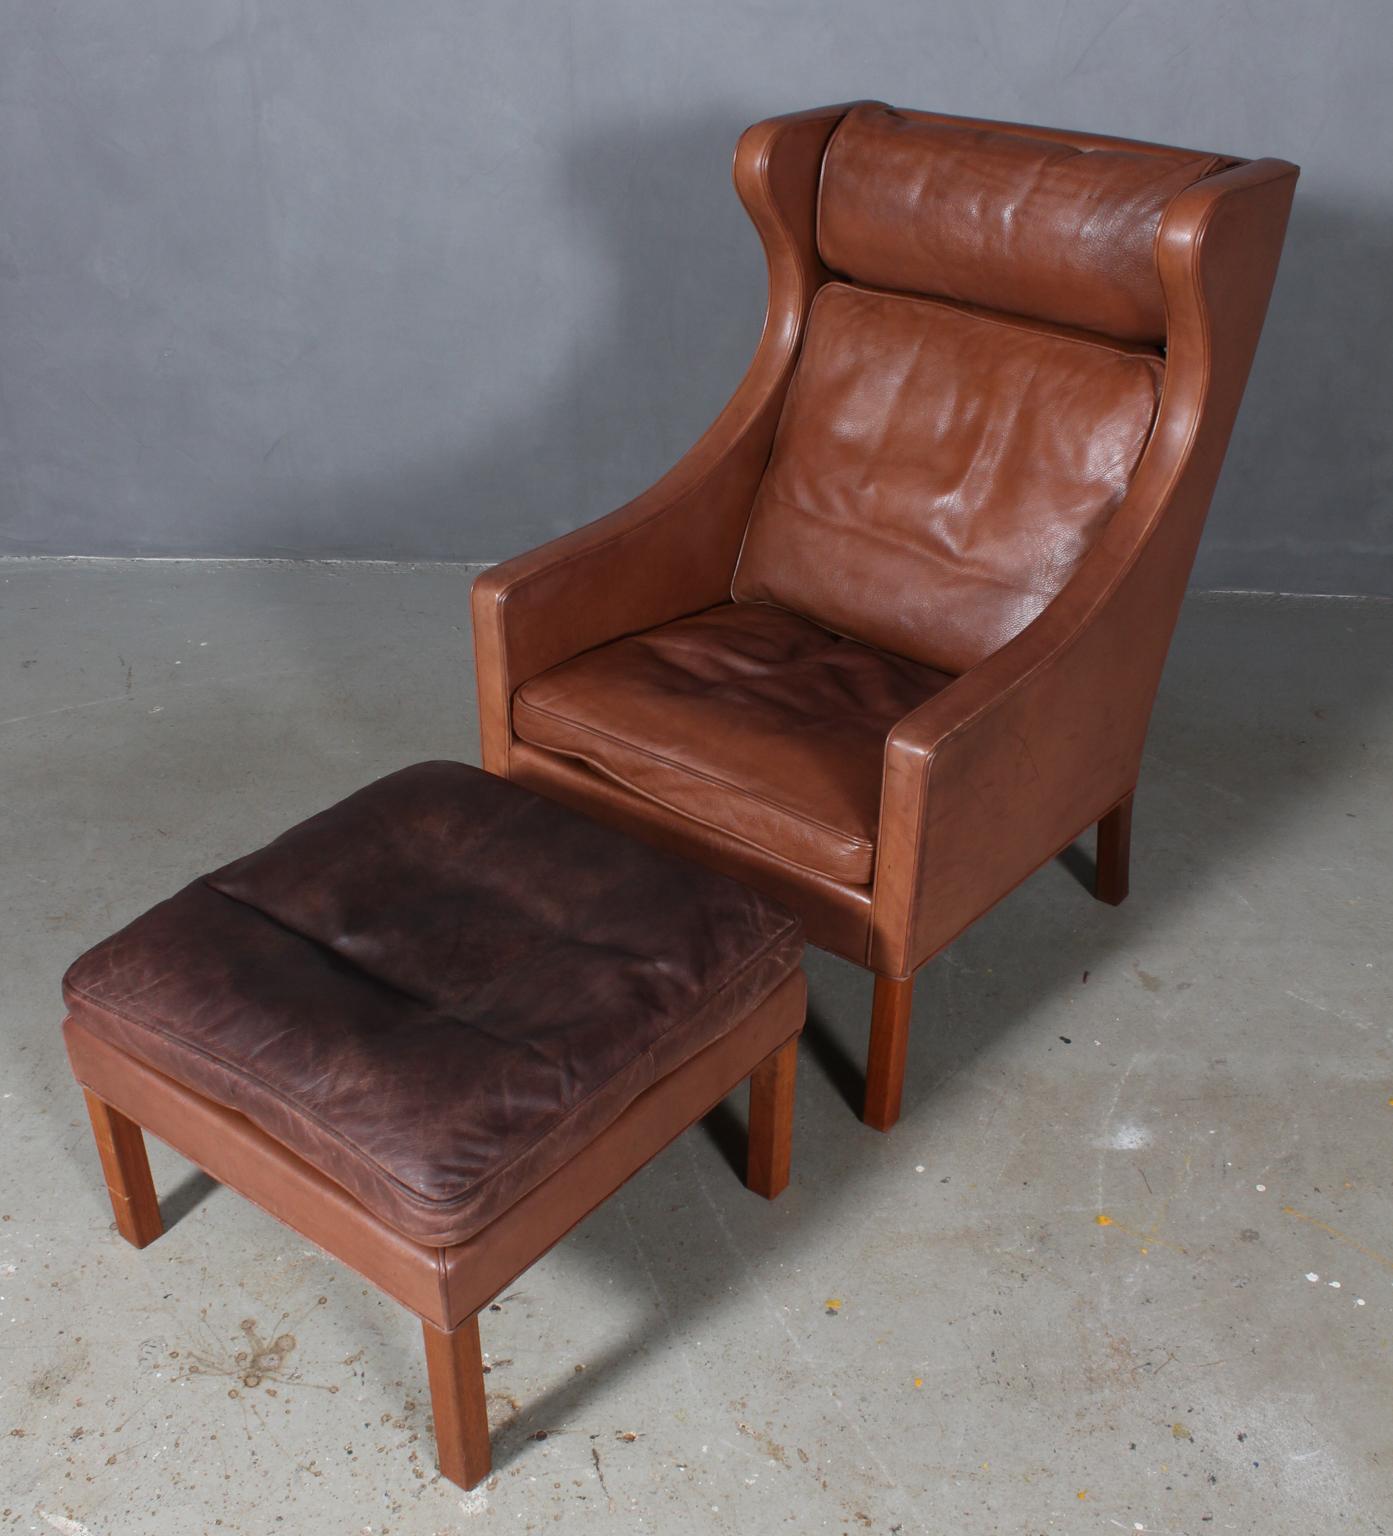 Børge Mogensen wingback chair and ottoman original upholstered with leather.

Legs of teak.

Model 2202 and 2204, made by Fredericia Furniture.